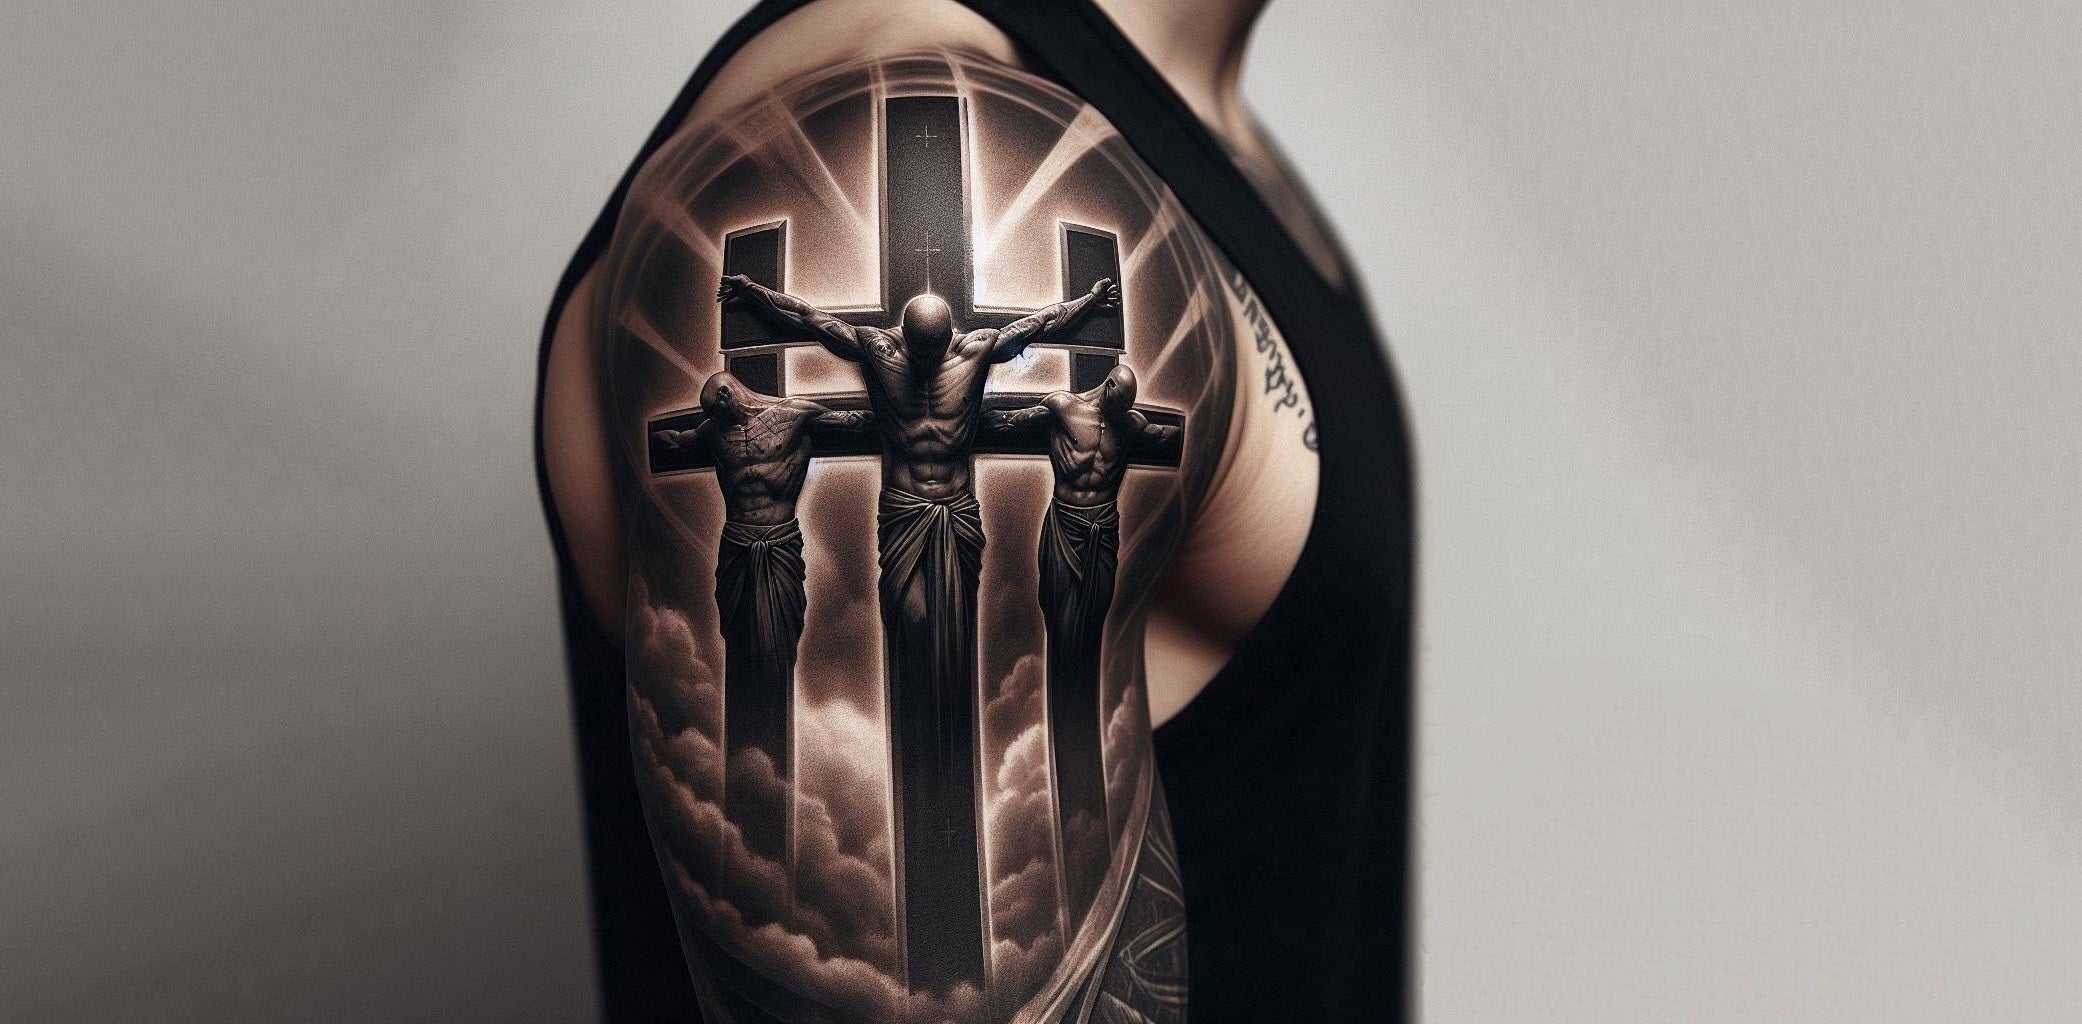 100 Amazing Cross Tattoos To Inspire You | Sleeve tattoos, Cool tattoos for  guys, Cross tattoo